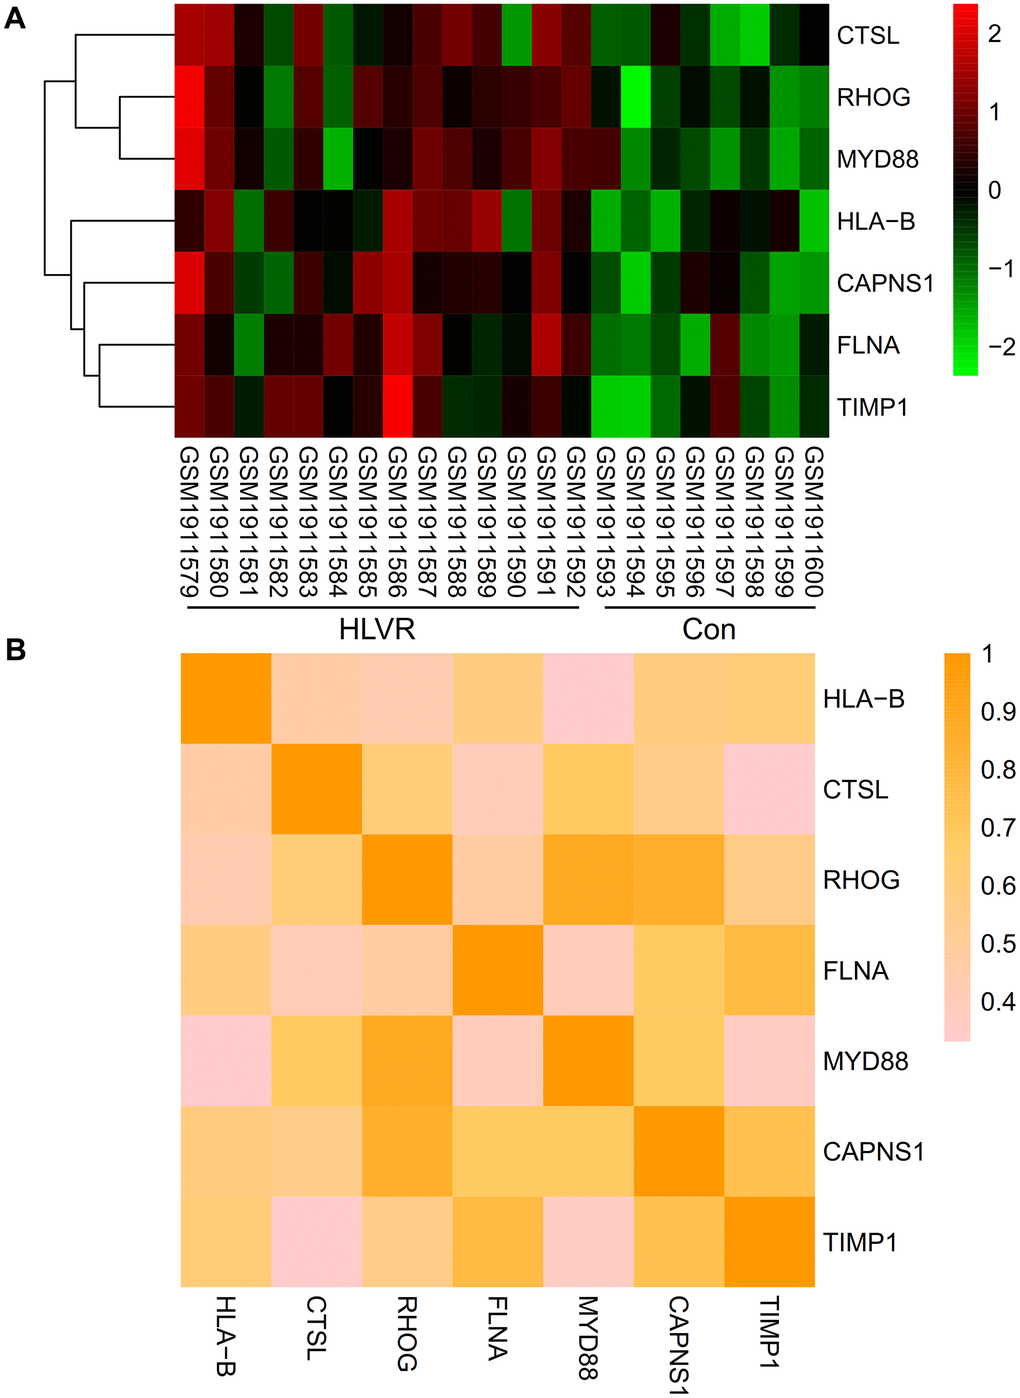 Expression and correlation analysis of significant hub genes. (A) A heatmap showing the expression level of significant hub genes in the GSE74144 dataset. (B) Correlations among all the significant hub genes.